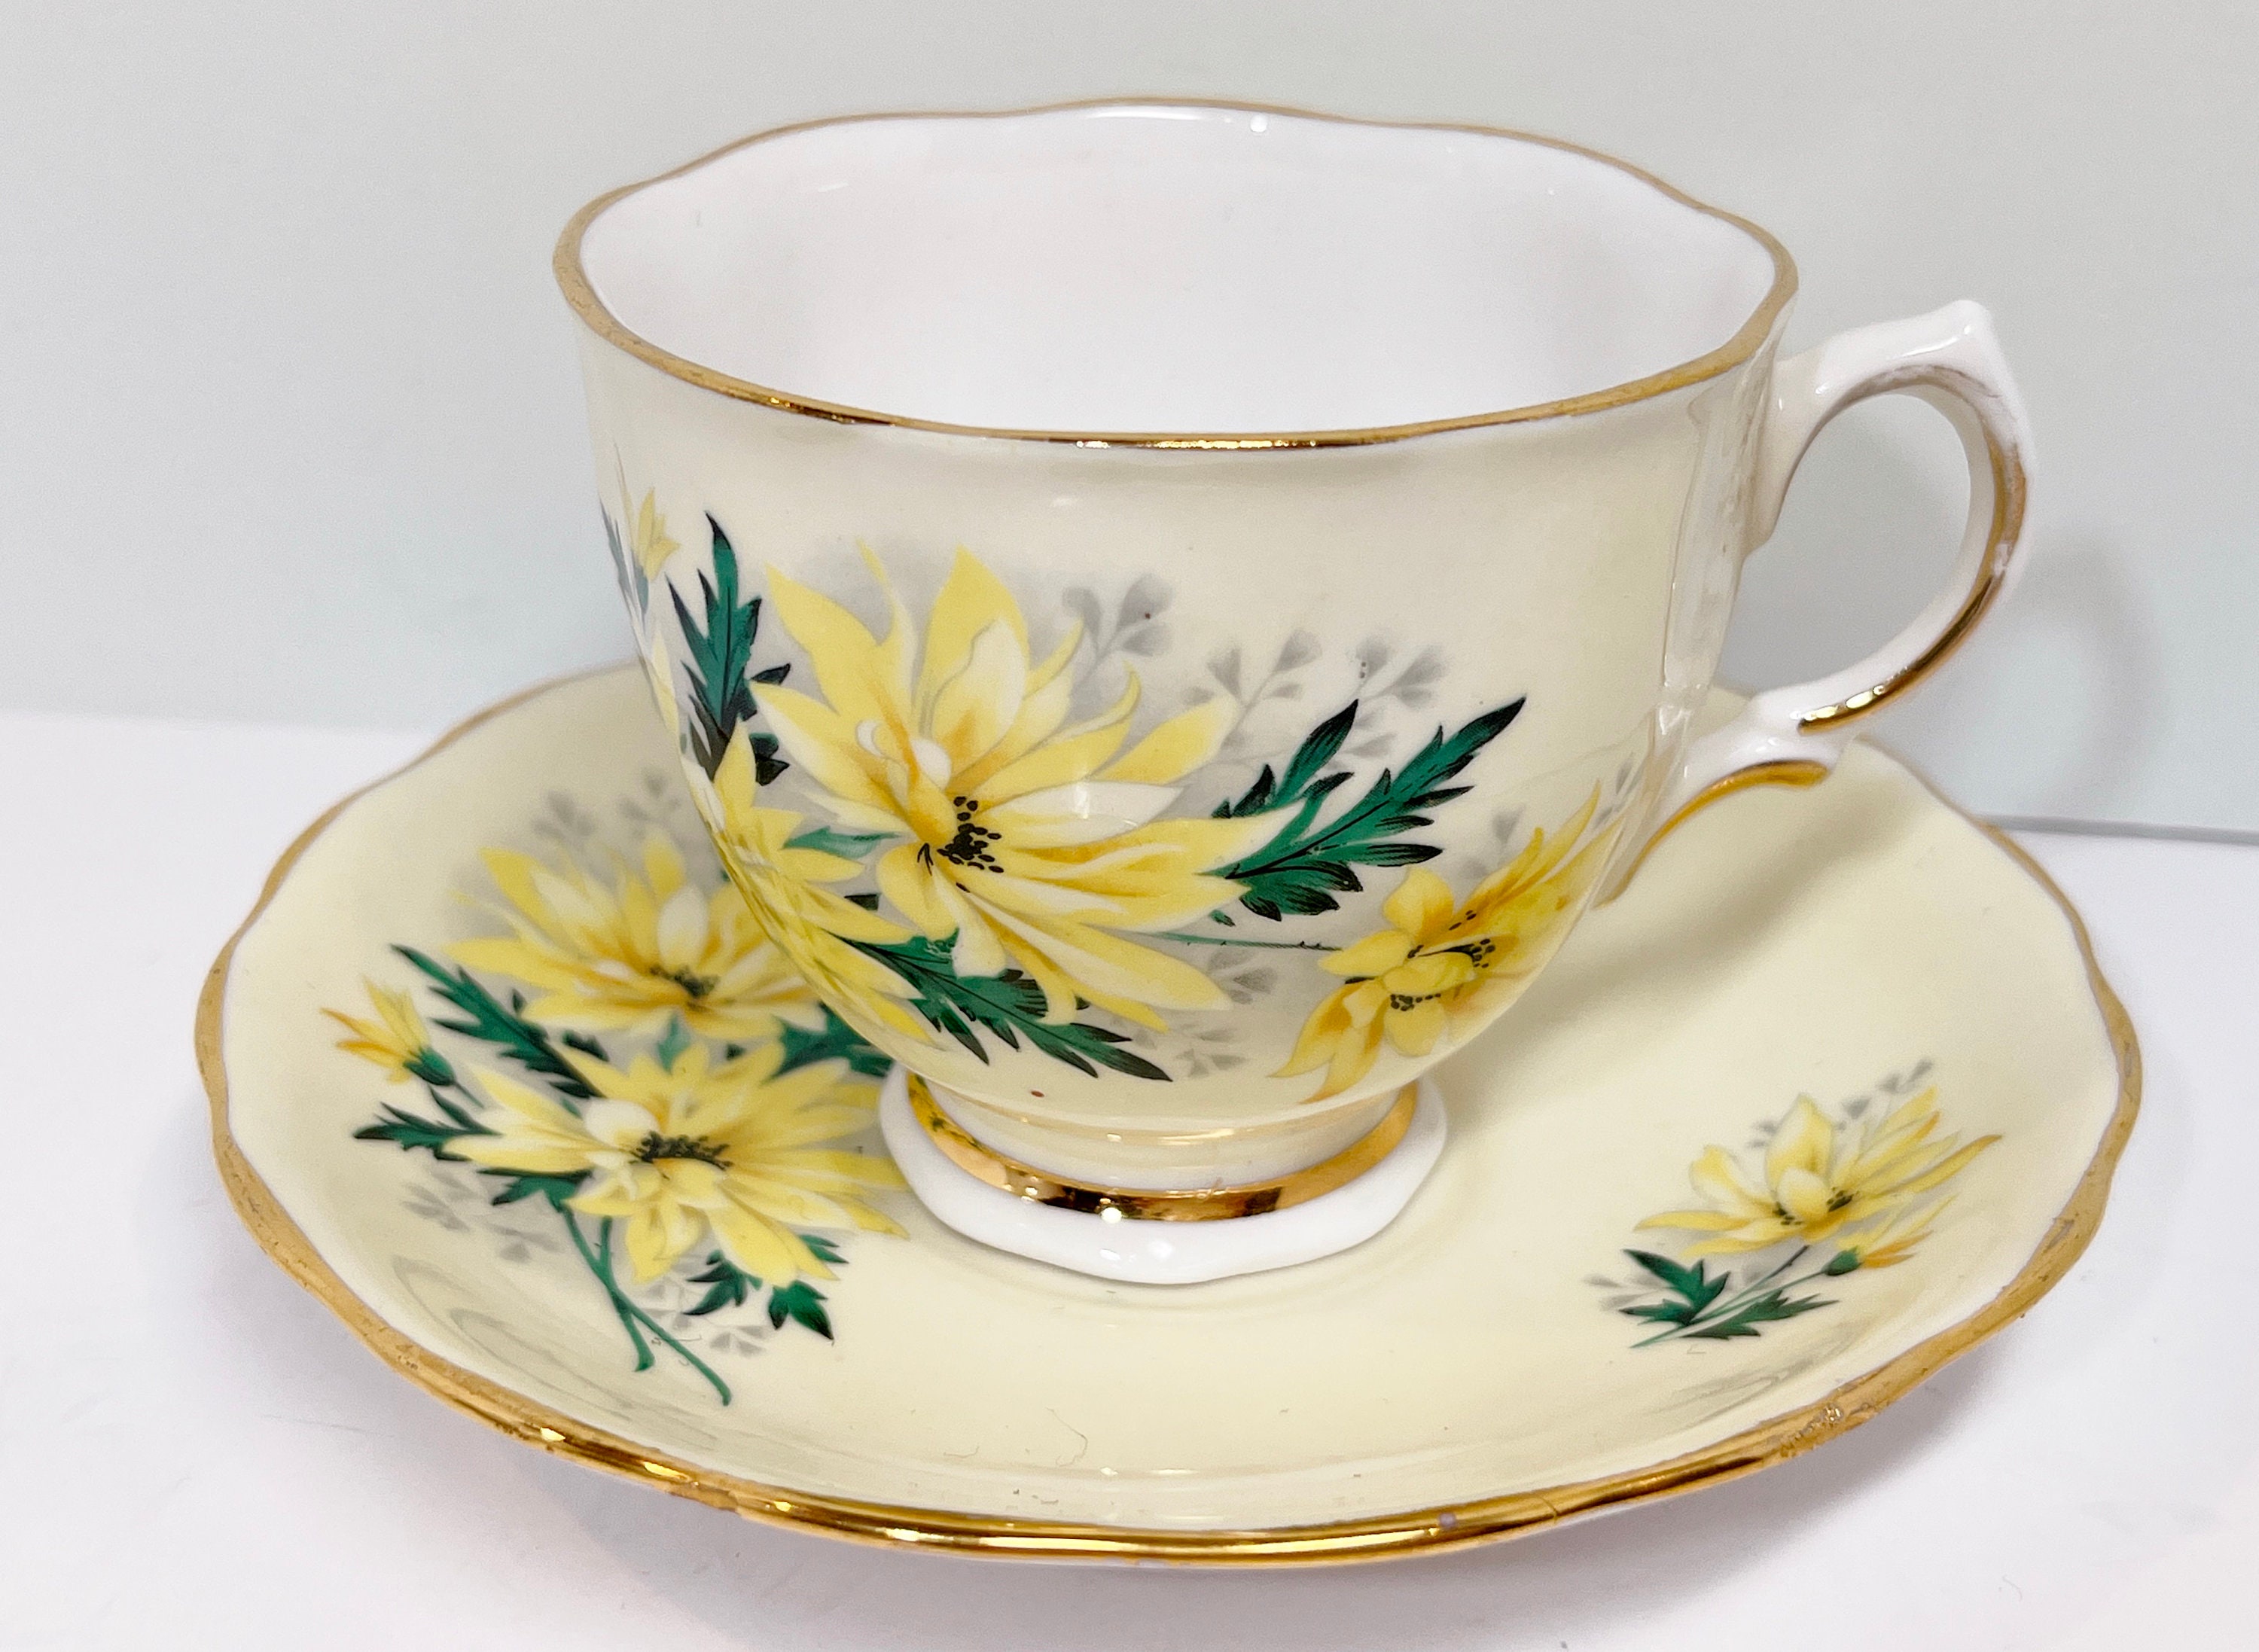 SHEEYEE Vintage Glass Tea Cup and Saucer Set with Lid and Spoon Enamel Daisy Flower Coffee Mug with Decorative Handle Elegant Tea Sets for Women 330ml